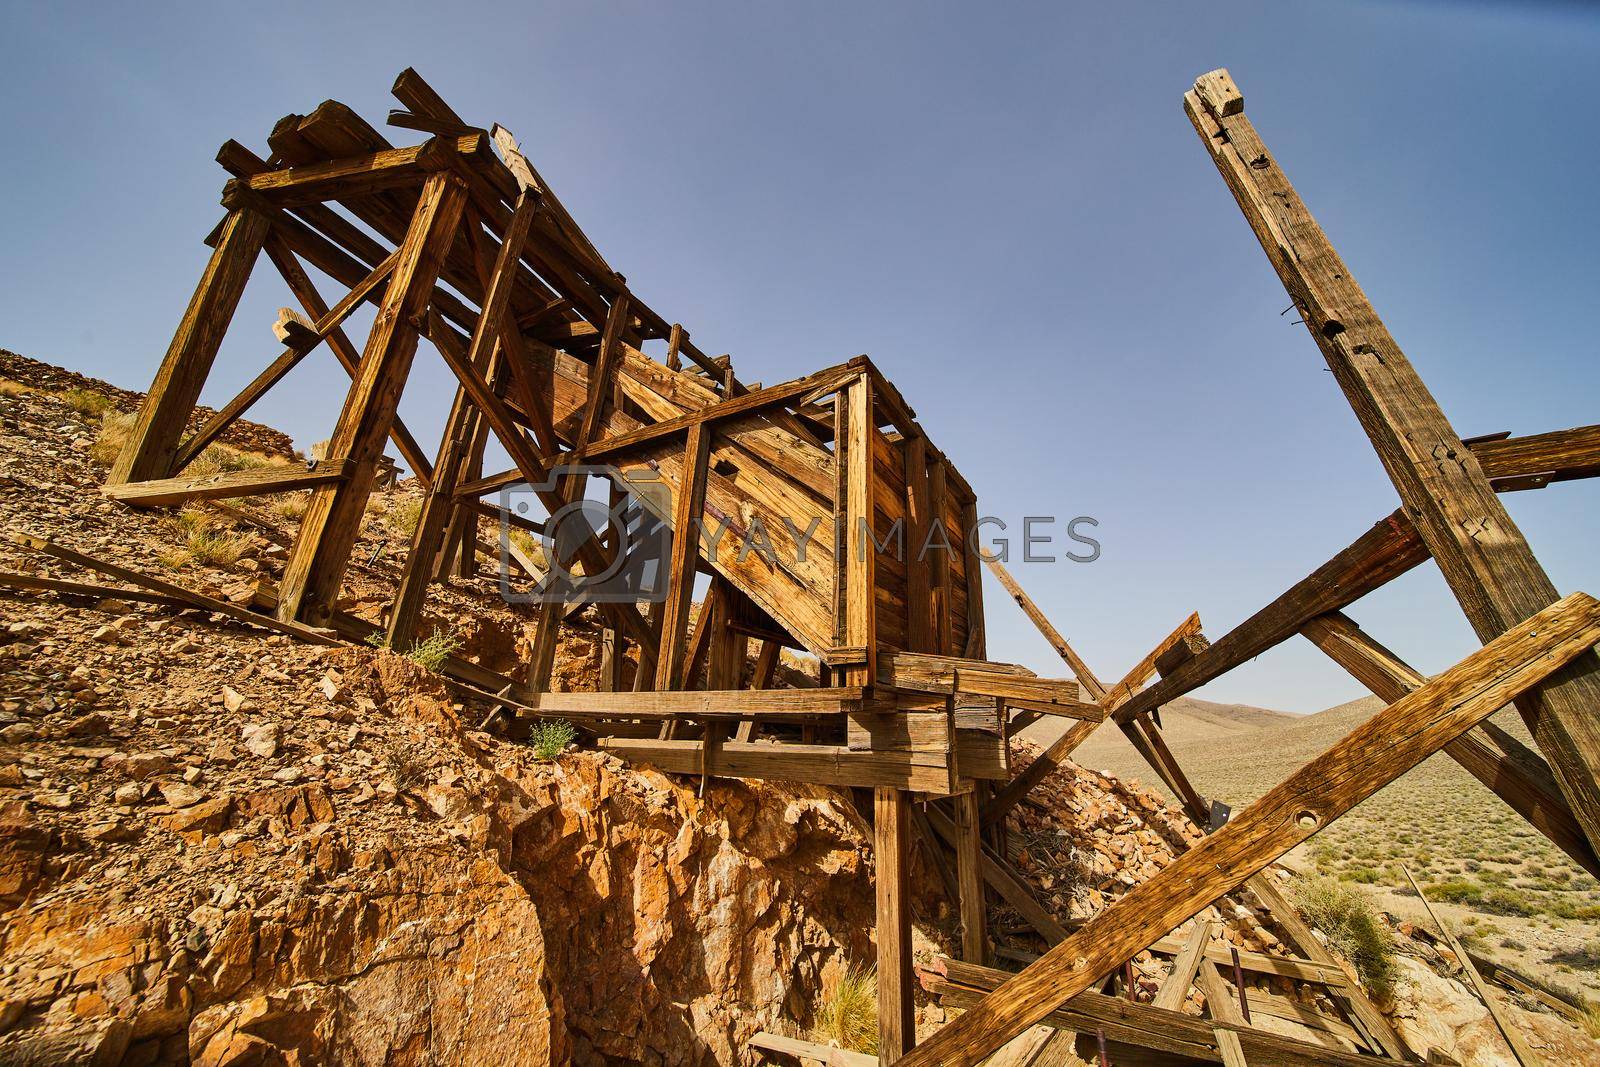 Royalty free image of Up close view of abandoned mining equipment in Death Valley desert by njproductions